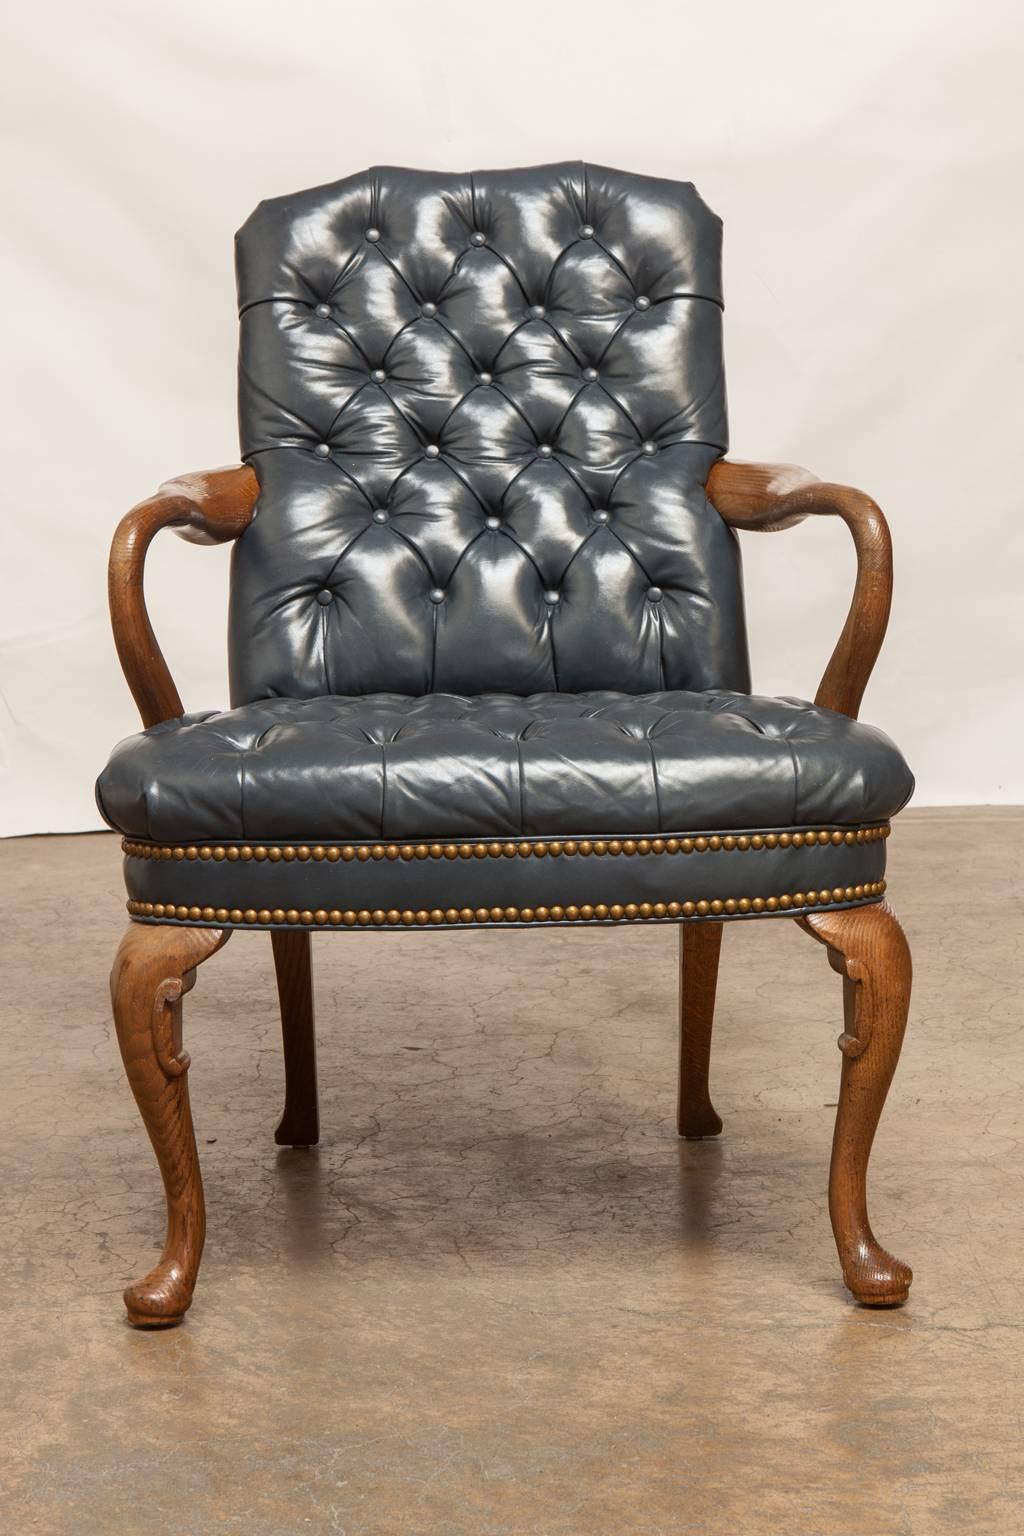 Impressive leather library chair featuring French blue tufted upholstery accented by brass nailhead trim. Supported by cabriole legs with pad feet this chair was made by Schafer Brothers and has a matching executive office desk chair also available.